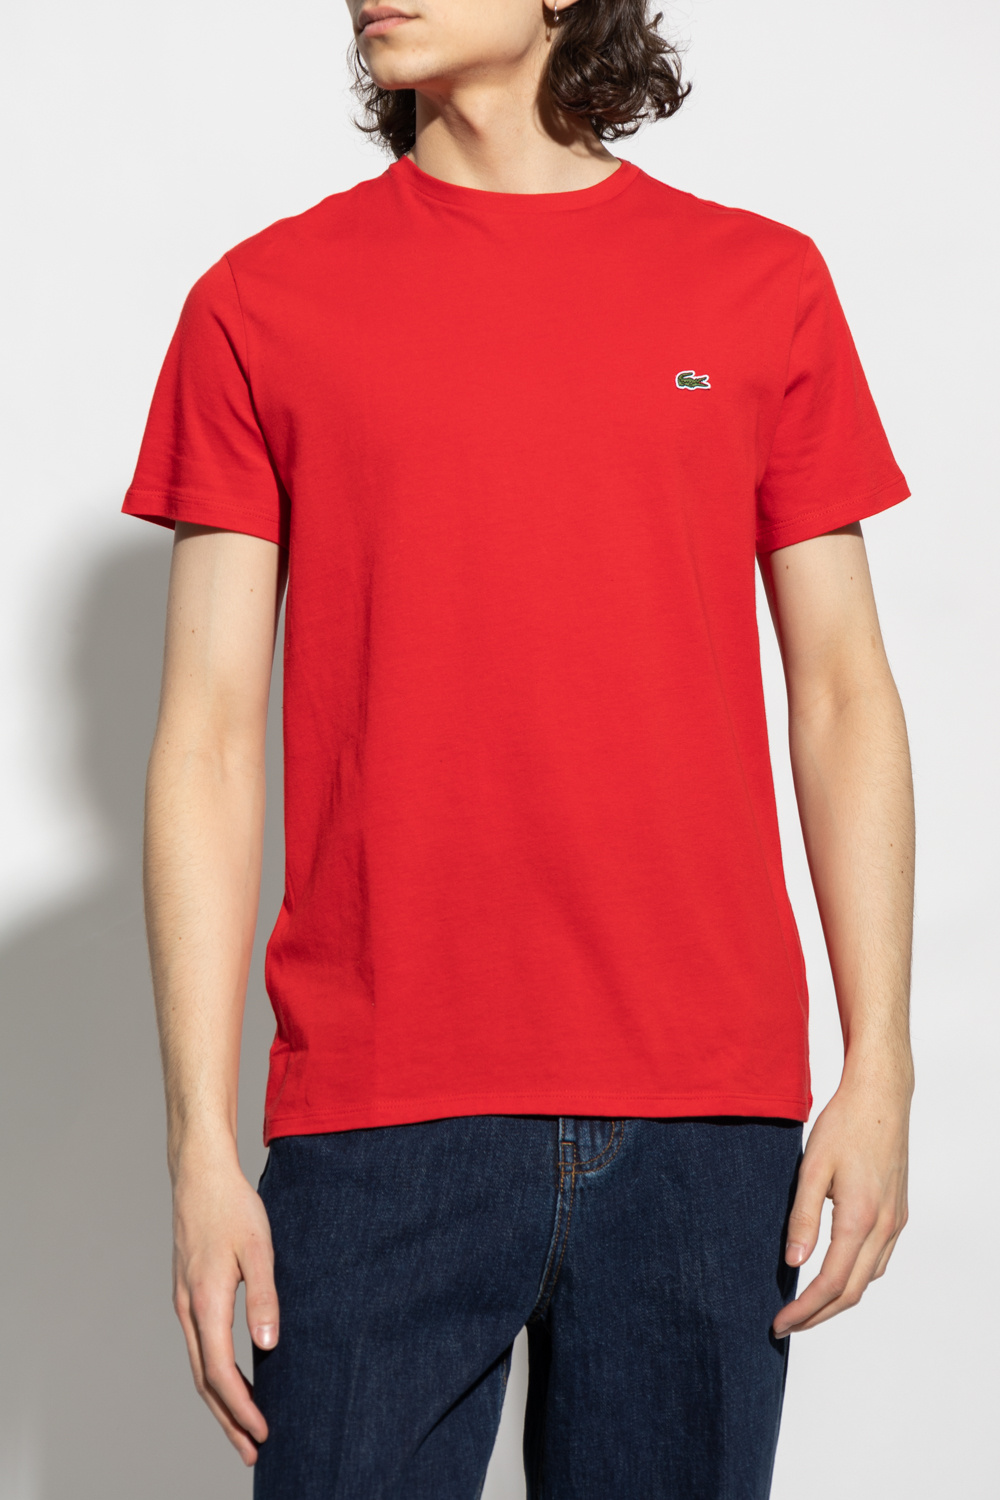 talla IetpShops Red - Lacoste 35 Trainers Carnaby - Lacoste Norway Lacoste Evo sneakers 318 hombre